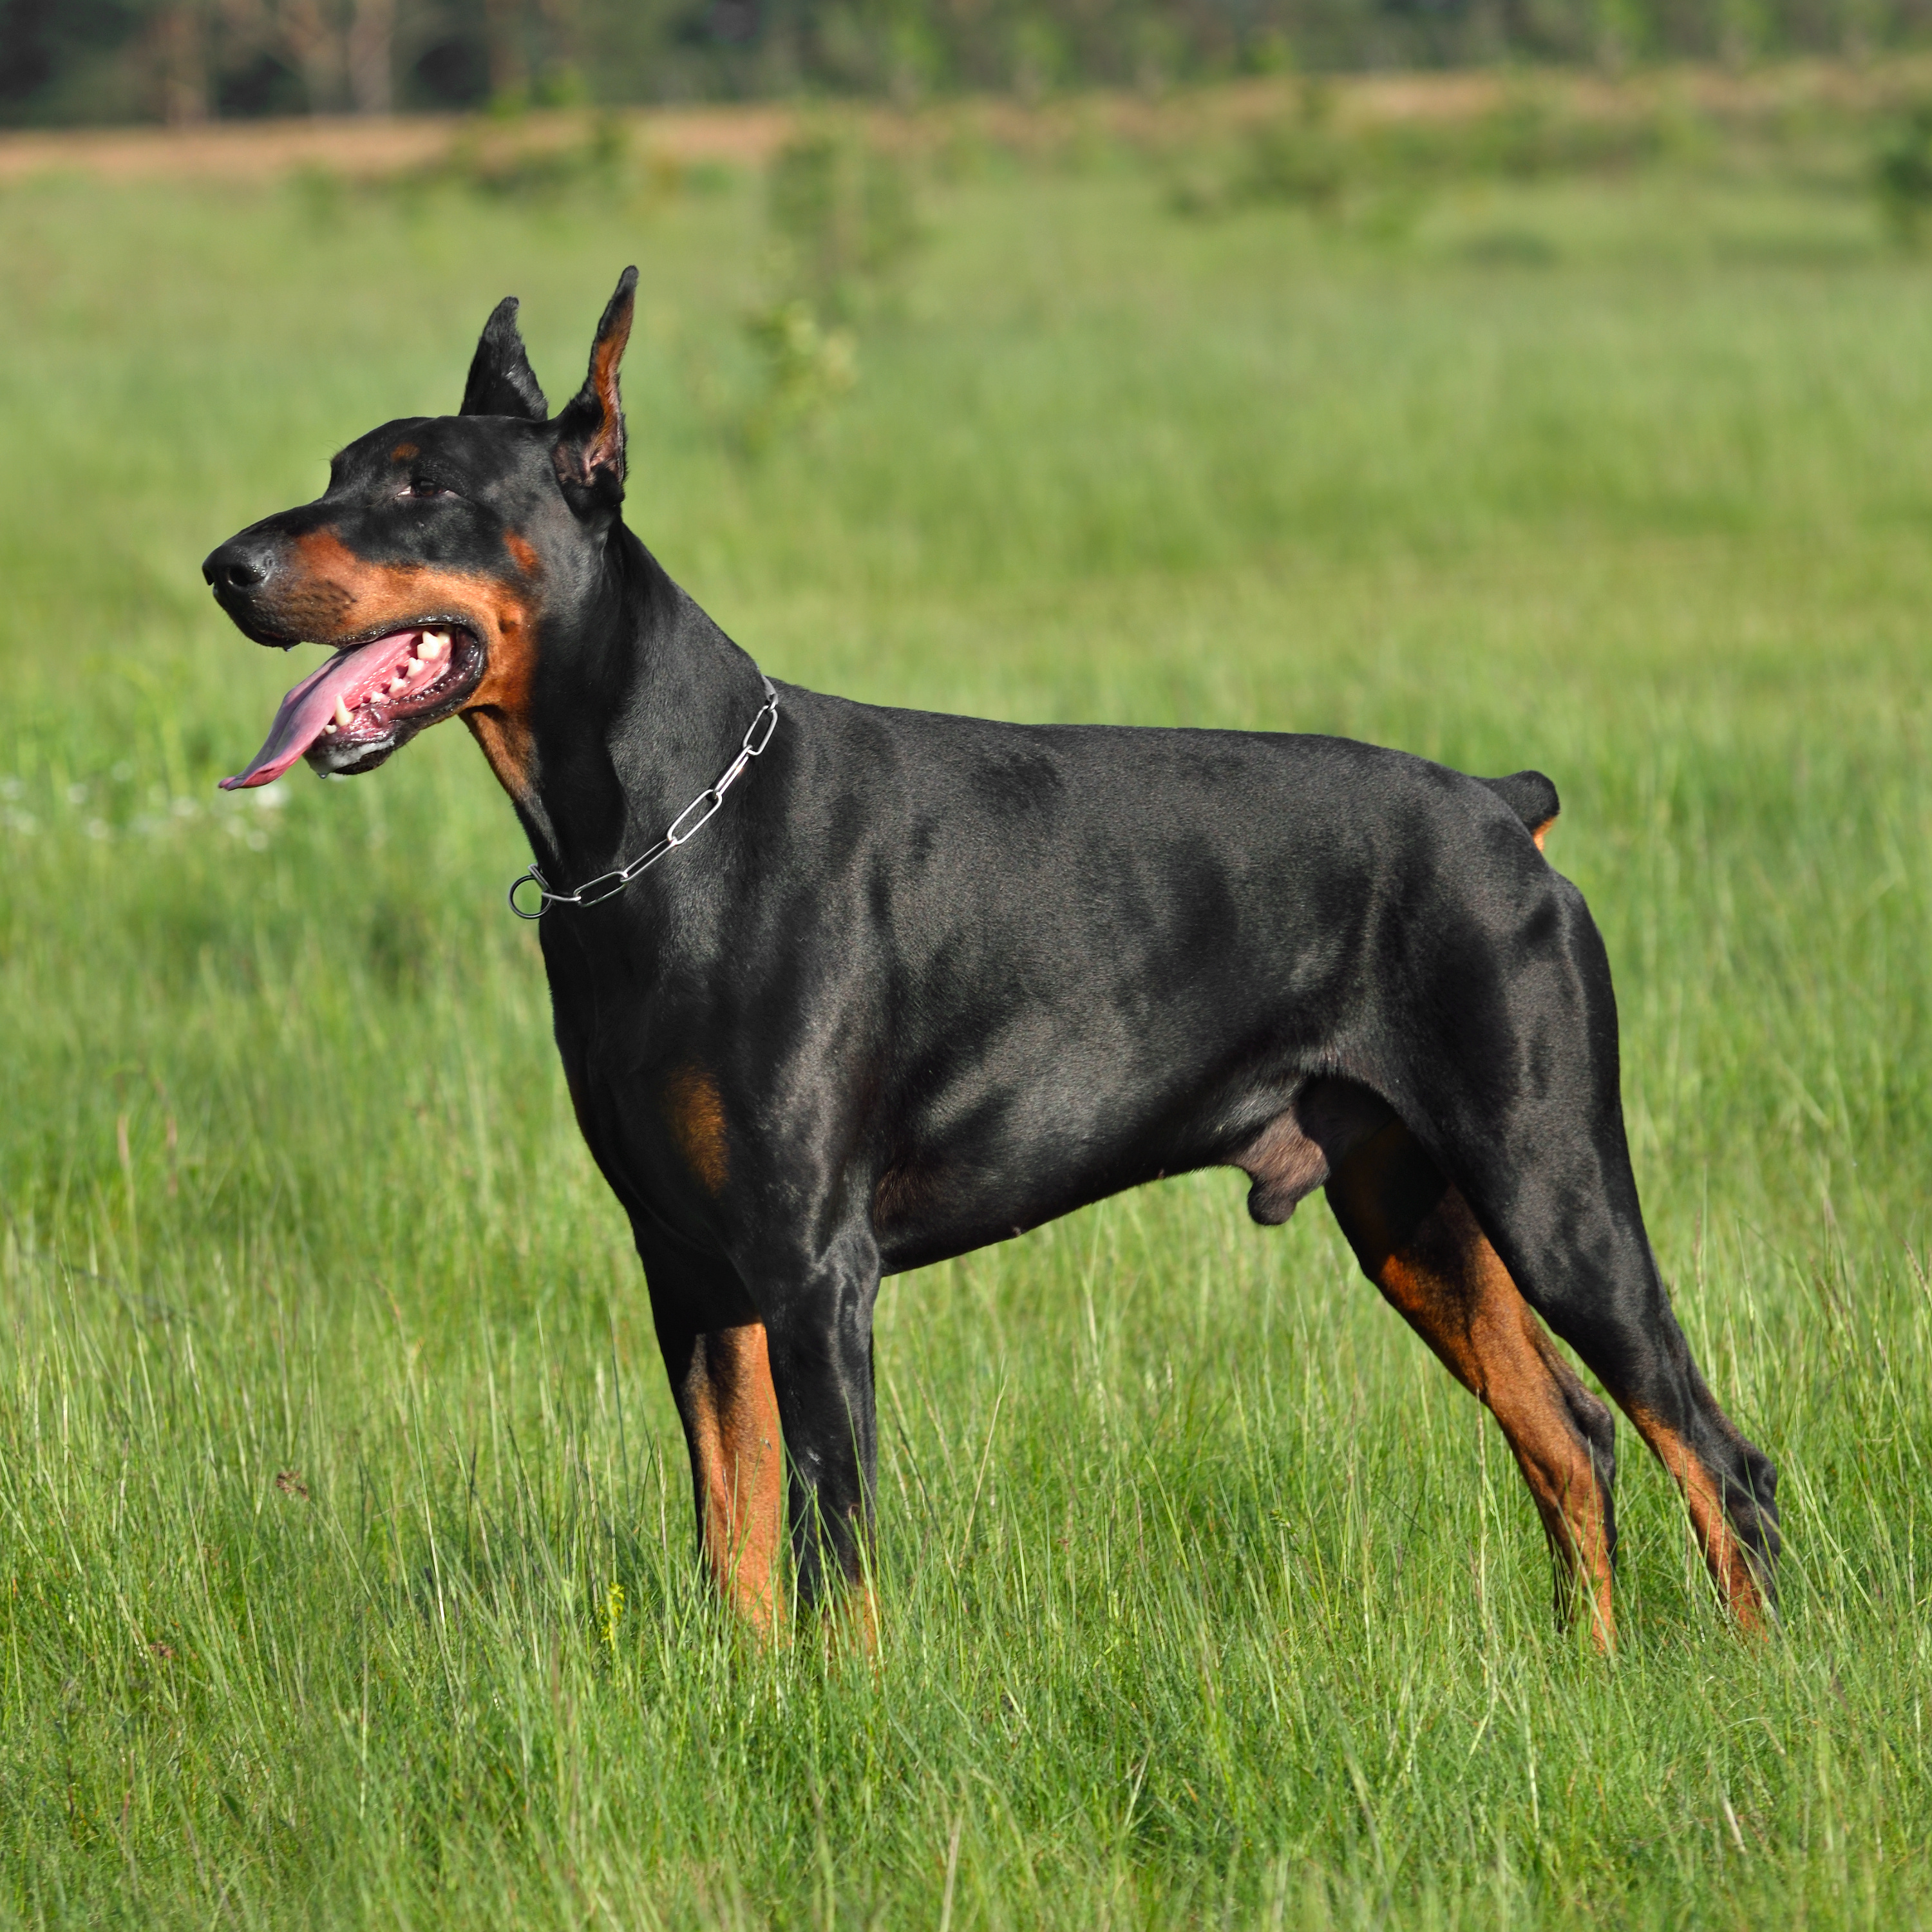 Dog Training Elite has expert Doberman training in Mandeville, LA
																															 that are experienced in a variety of positive training methods for Dobermans.